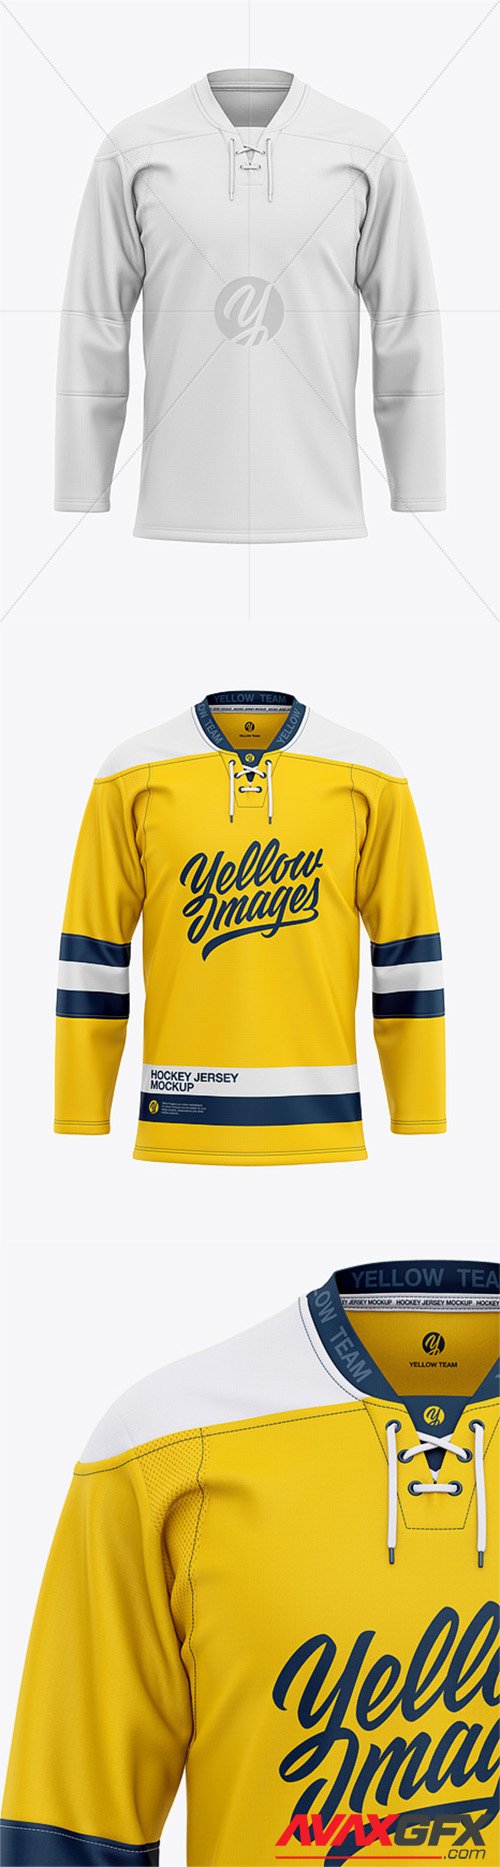 Download Men's Lace Neck Hockey Jersey Mockup - Front View 40199 ...